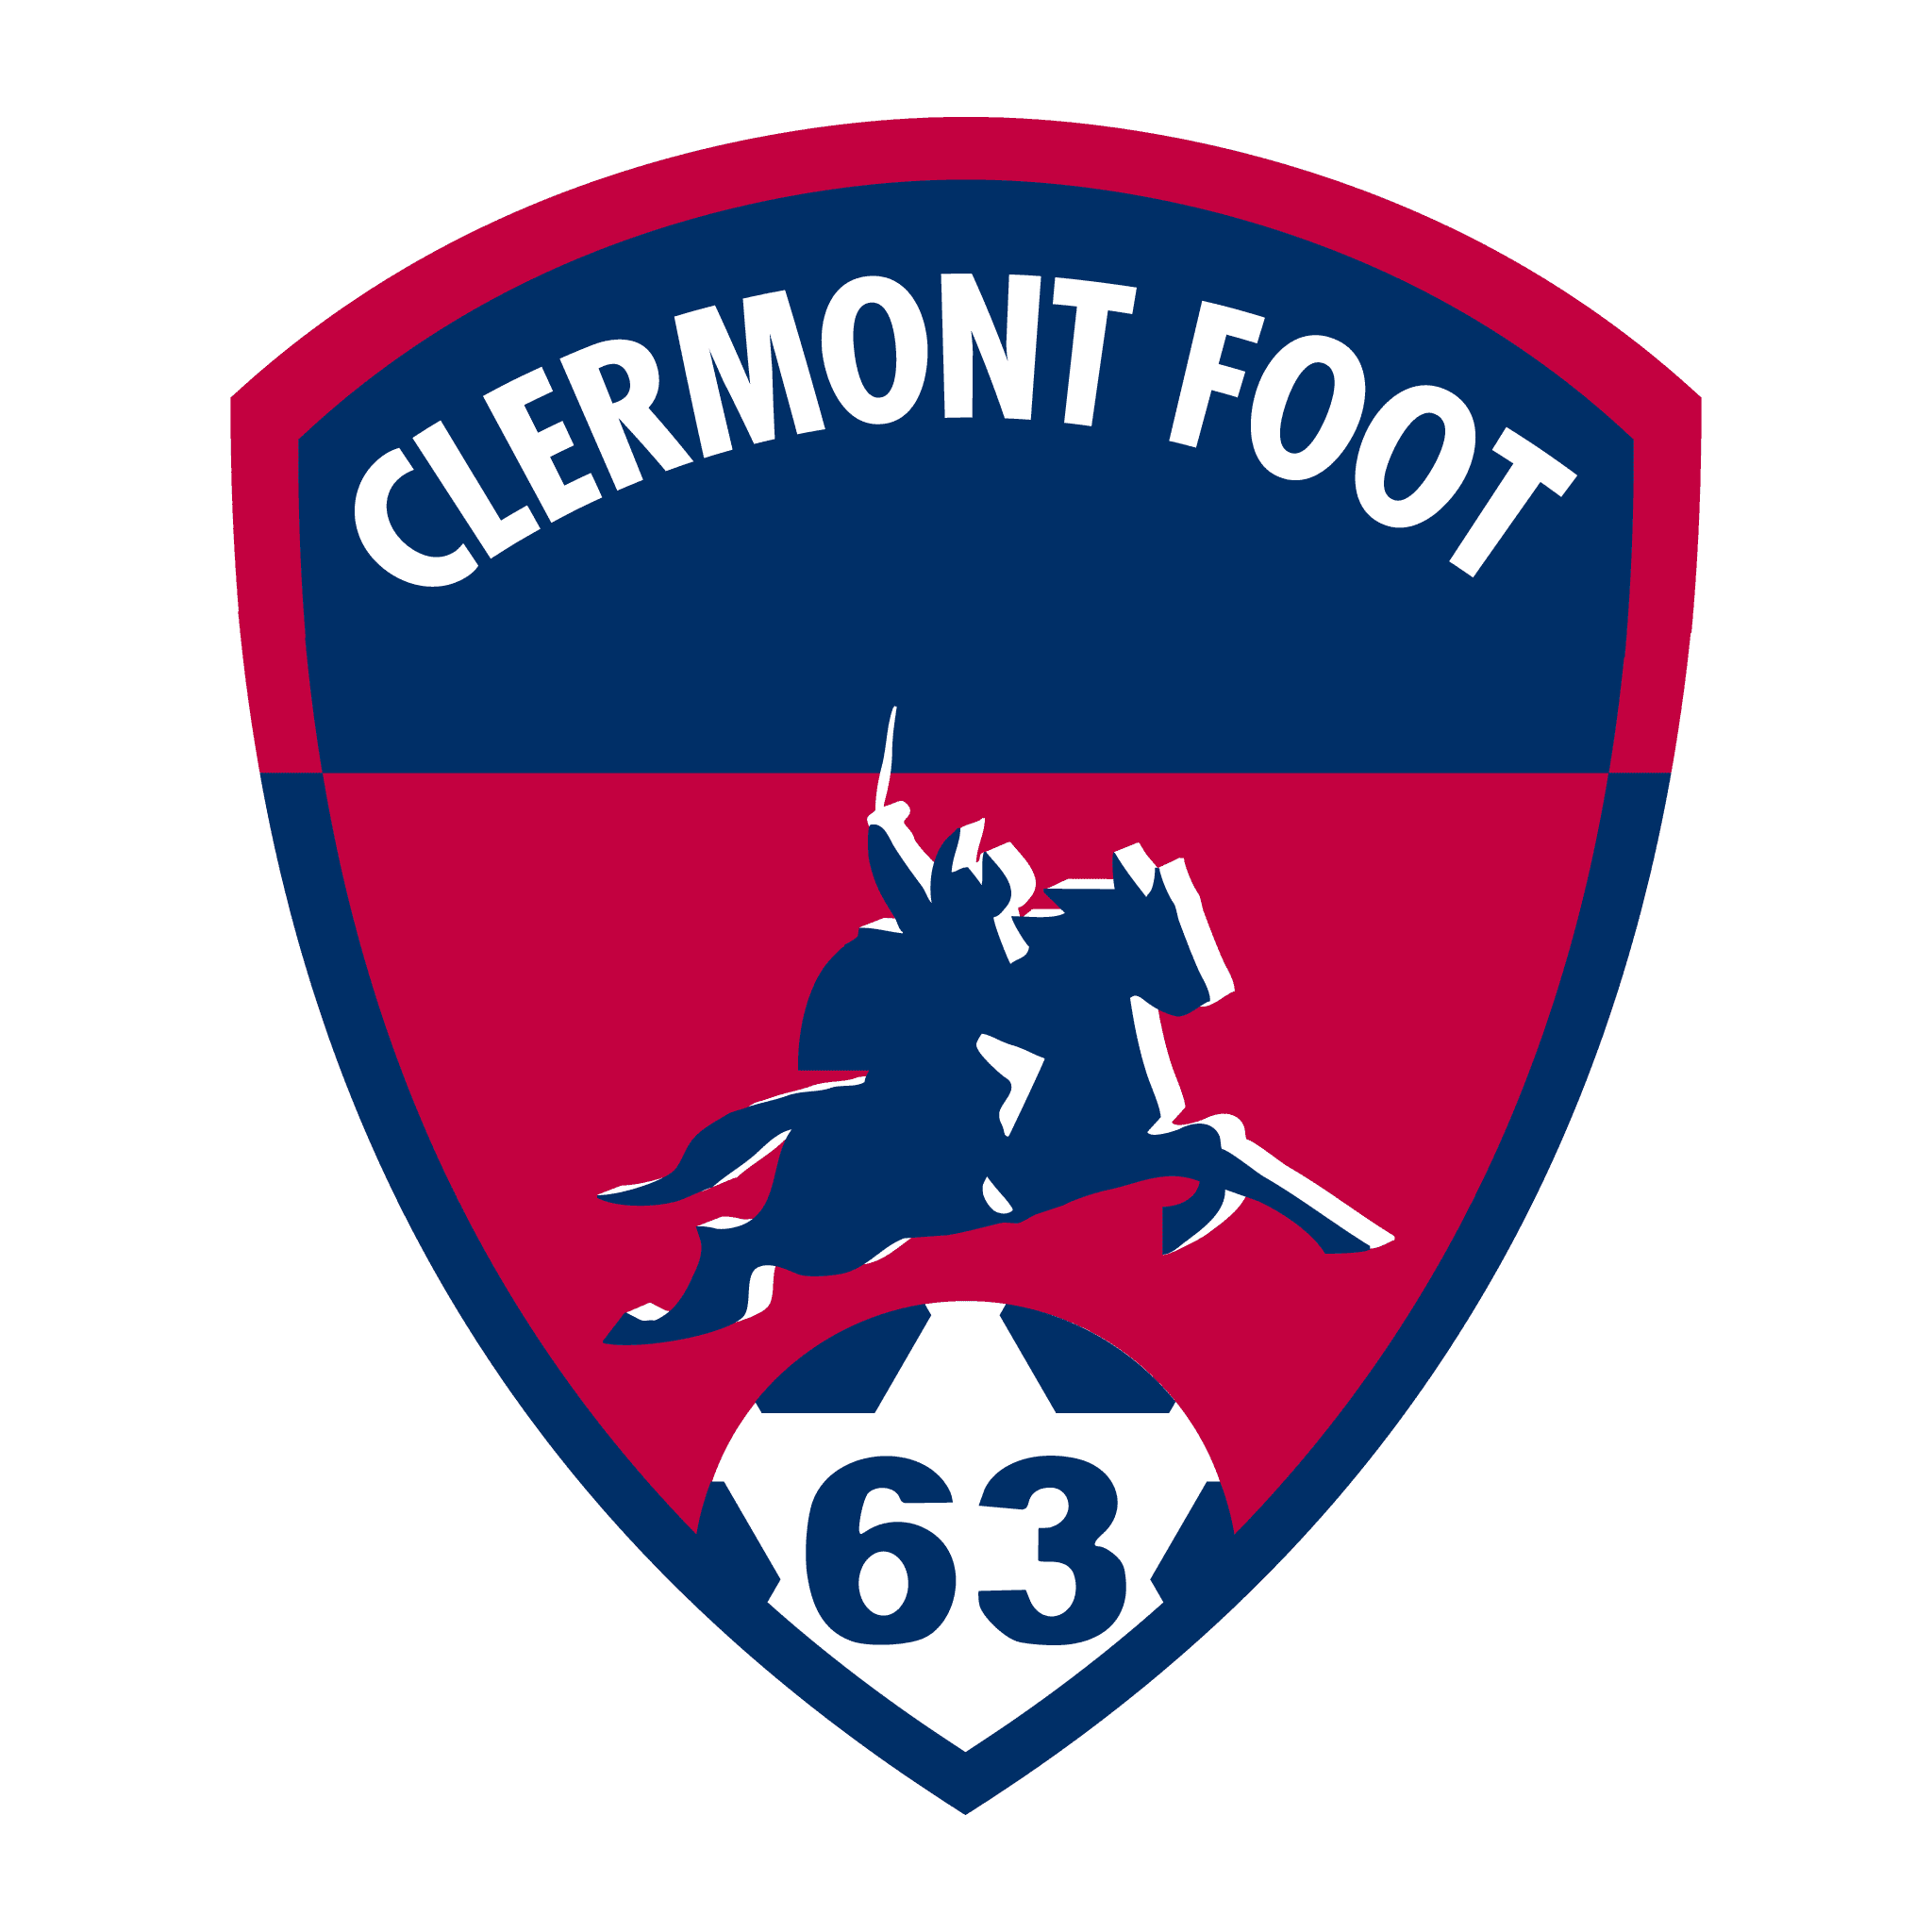 brasao do clermont foot 63